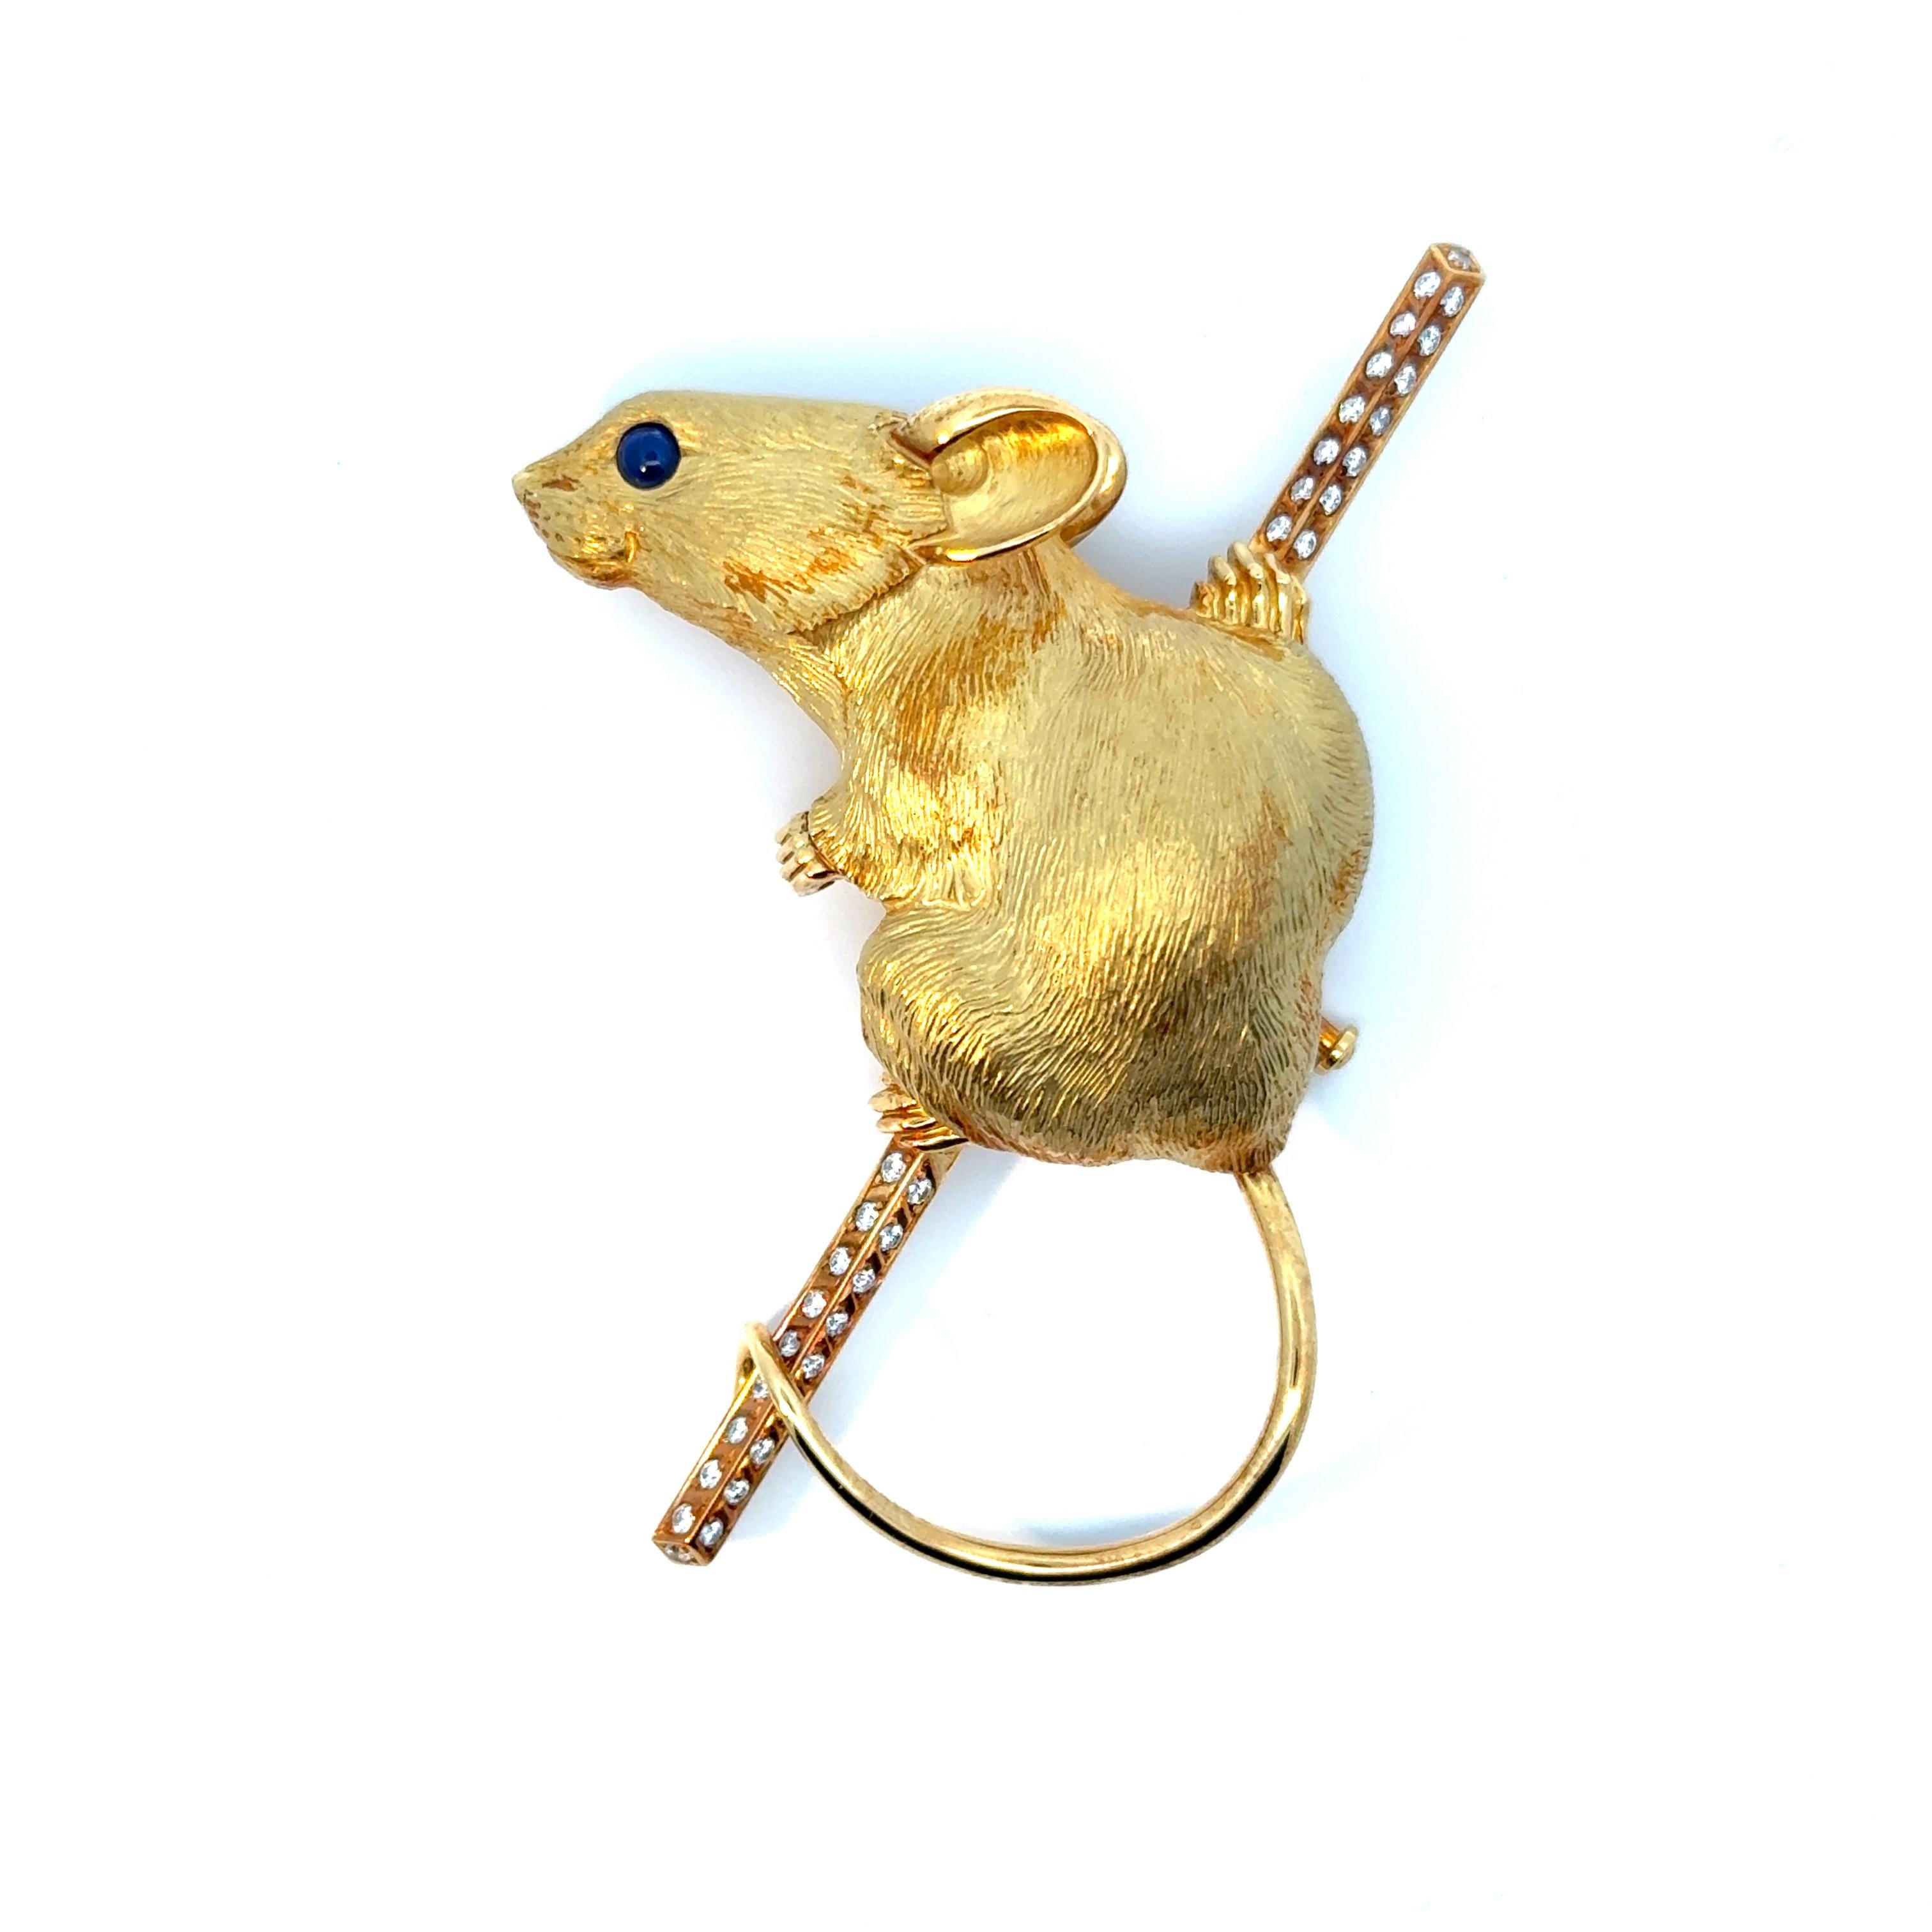 Designed by gemstone-carving-master Alfred Zimmermann, following his designs of his one of a kind gemstones carvings.
This unique brooch has been made in our own goldsmith workshop in Idar-Oberstein. 18ct yellow gold was used by our goldsmiths to